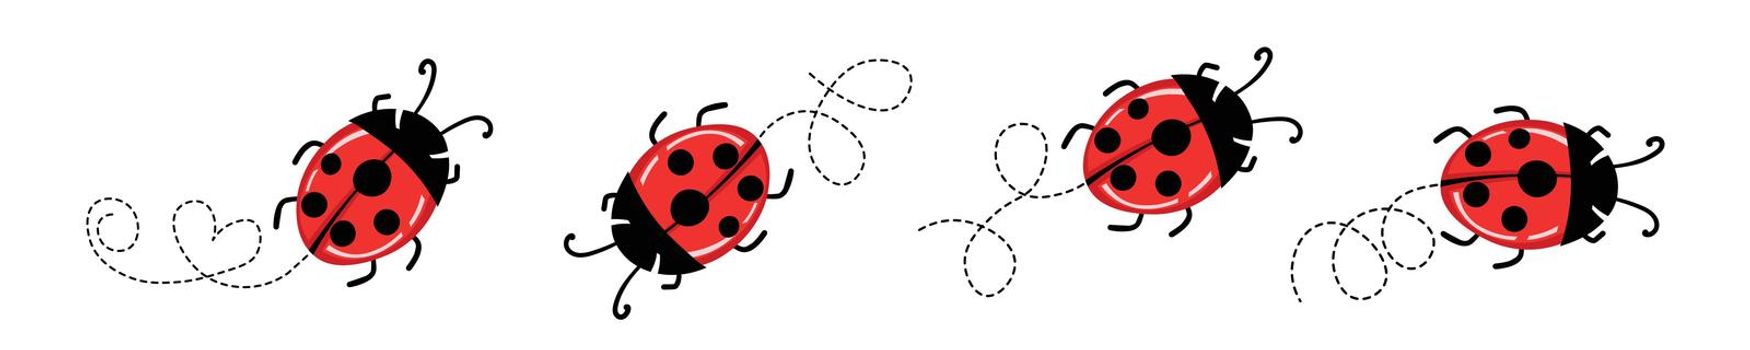 Set of cartoon ladybird mascot. A small ladybugs flying on a dotted route. Vector characters. Incest icon. Template design for invitation, cards. Doodle style